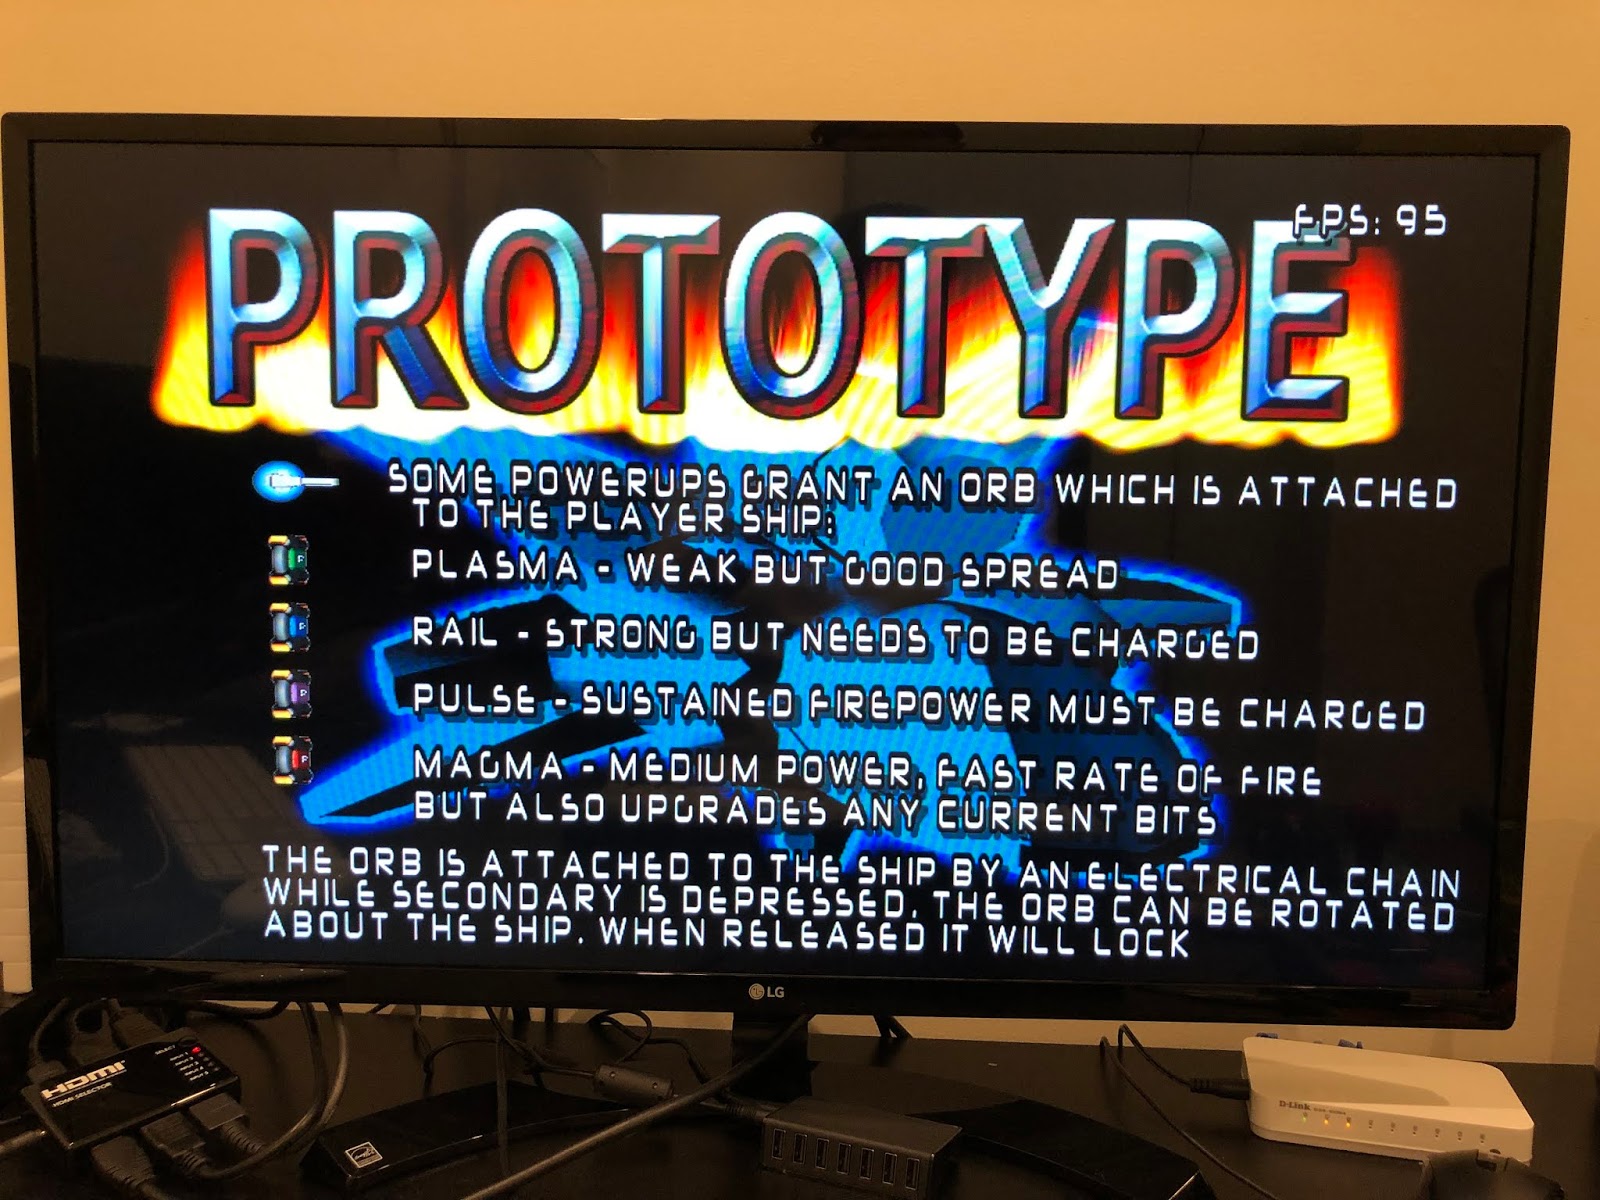 bruh, just look at what i just found recently! : r/PrototypeGame